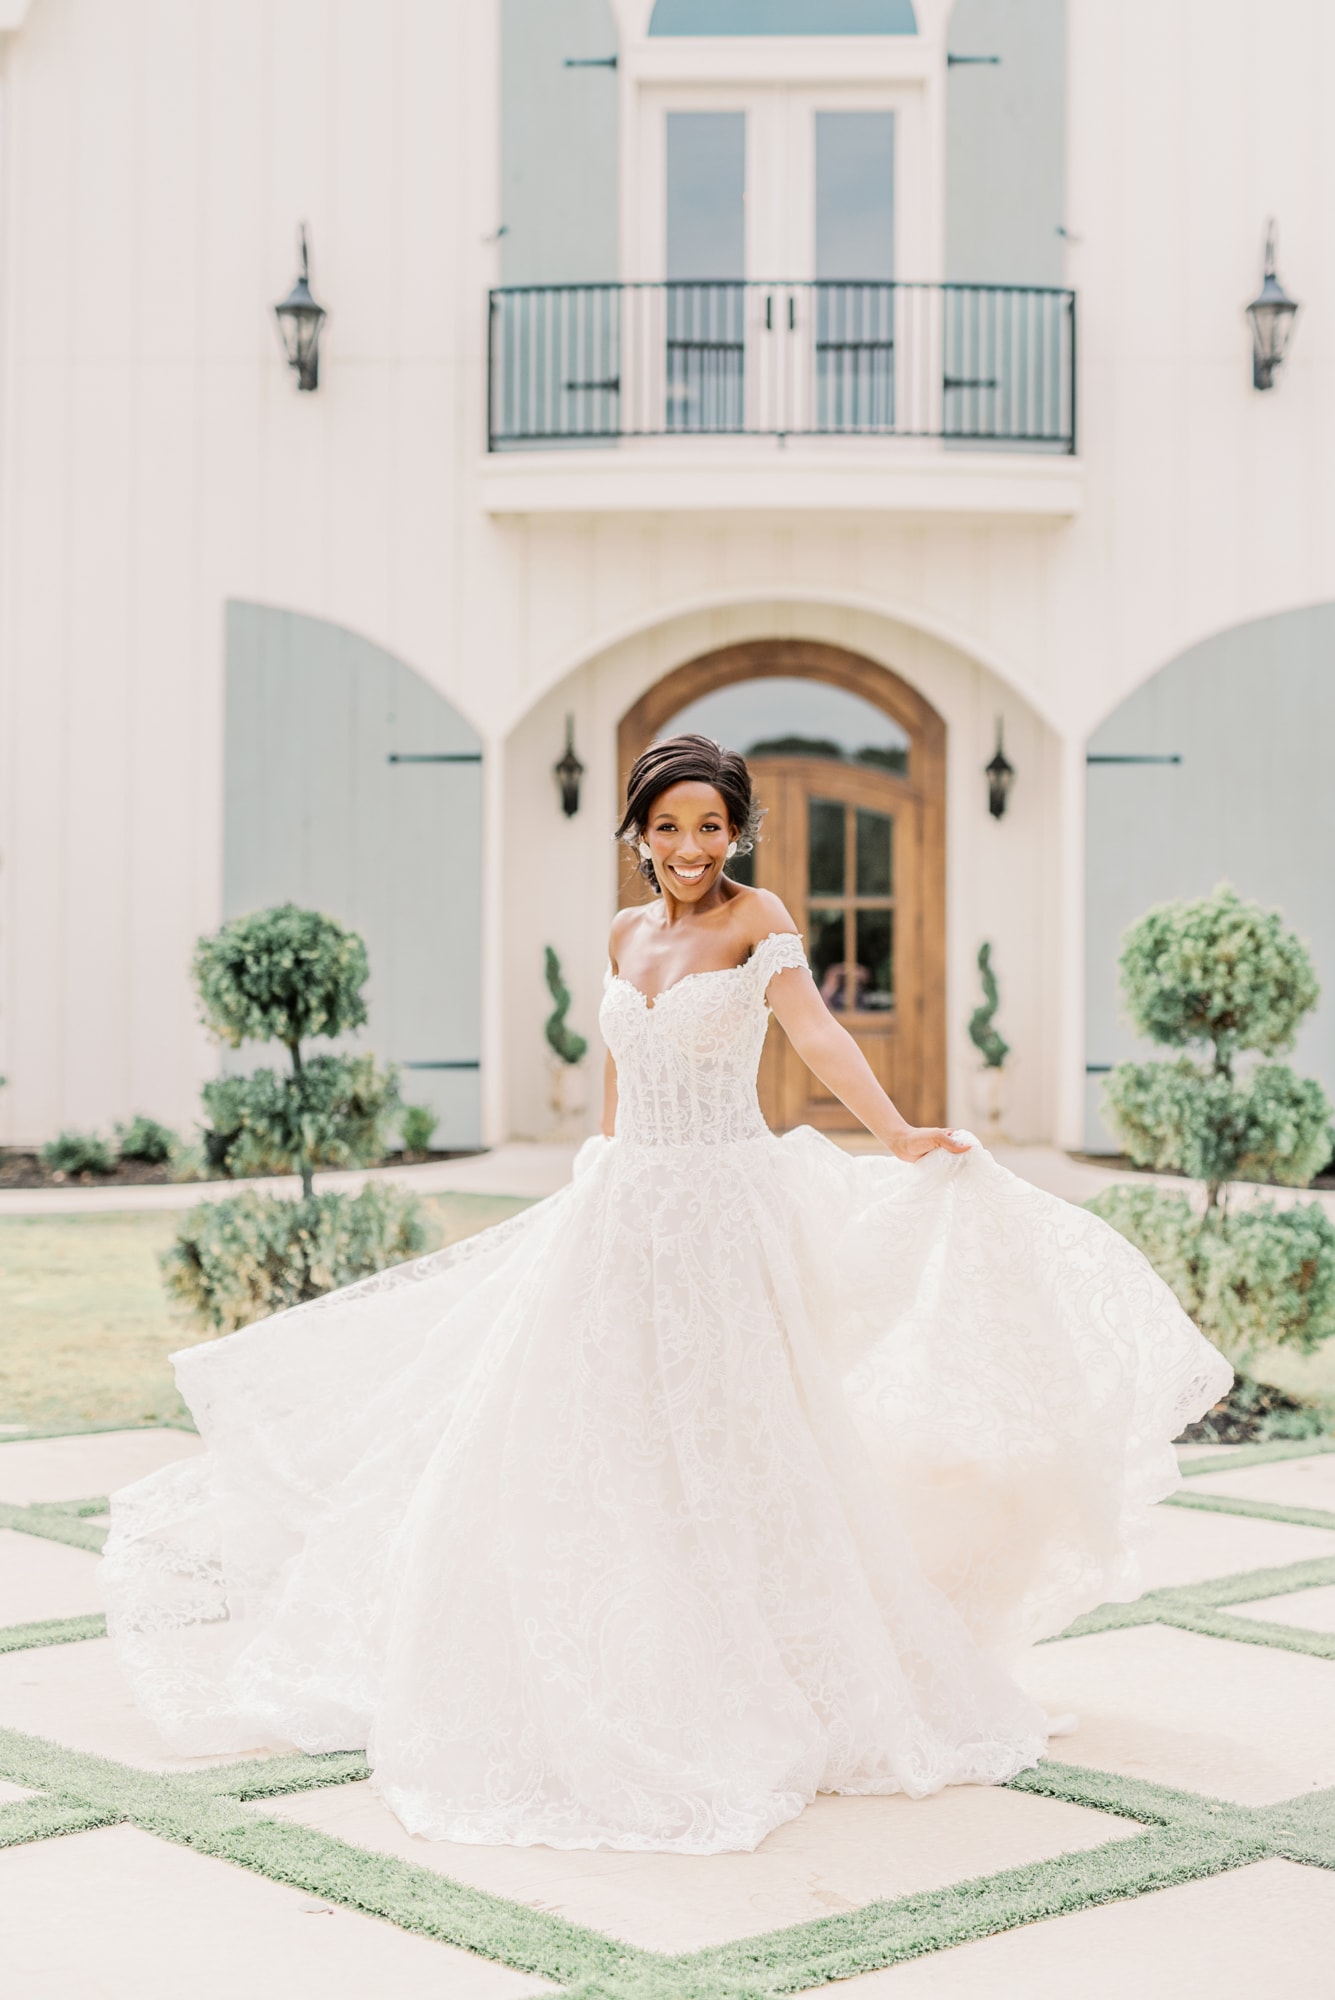 Wedding ball gown | French Farmhouse Bridal Session by Karina Danielle Photography